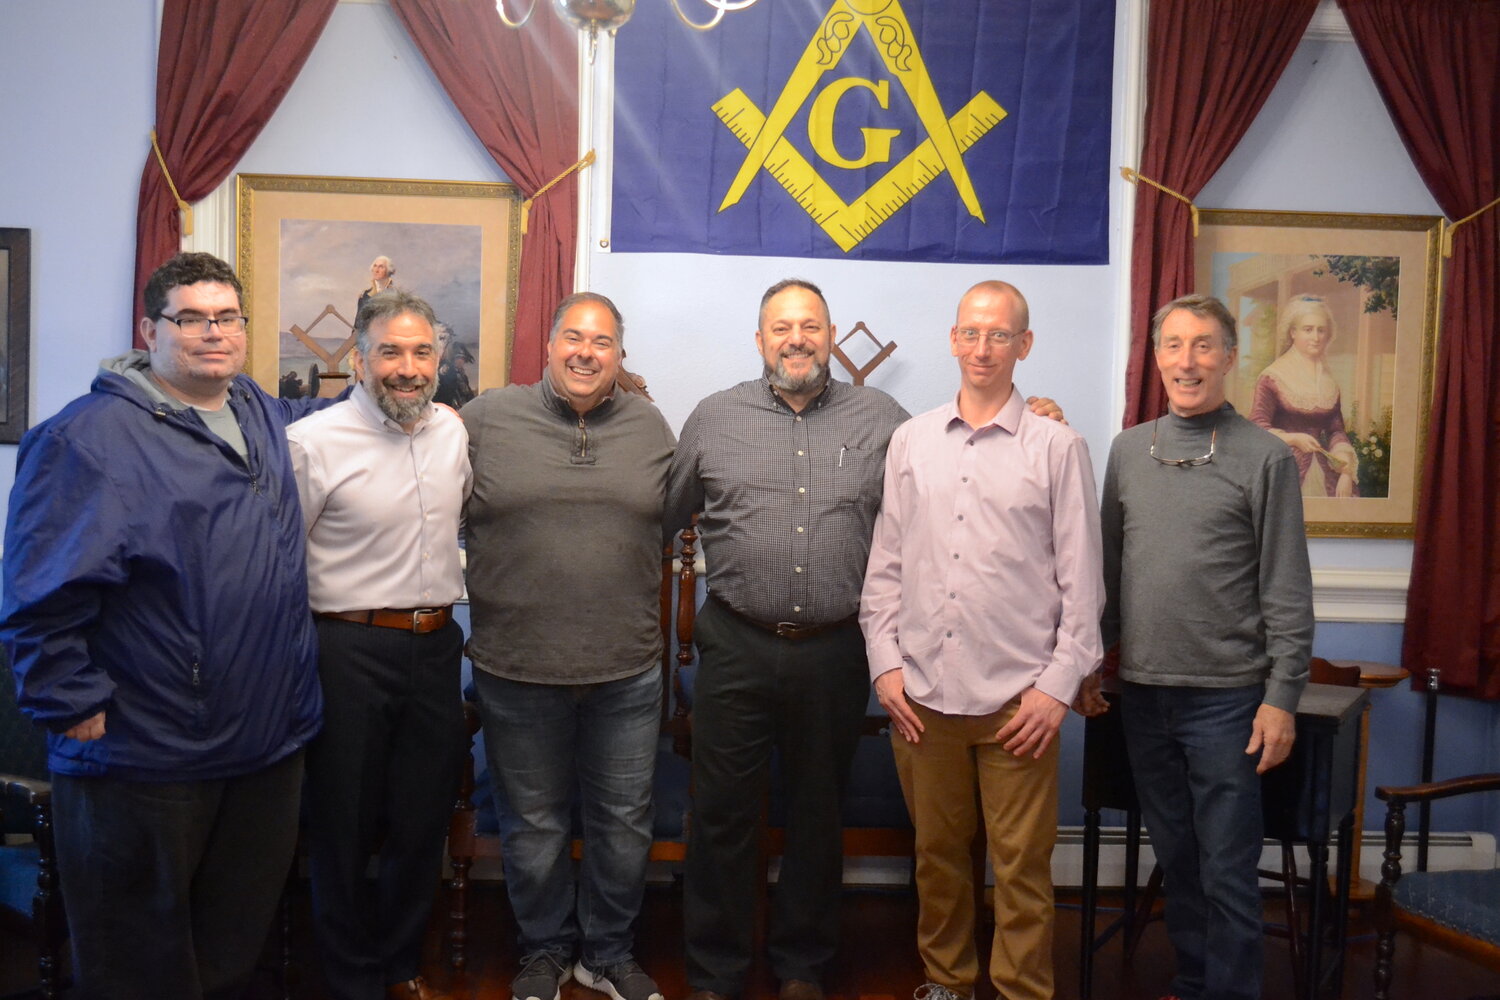 From left to right: Cory Jacques, John Miranda, Andrew Giovannini, Scott Mlynek, Lance Ratkoski, and Jim Murhpy, are all a part of the effort to revitalize and re-energize the second oldest Masonic Lodge in America.